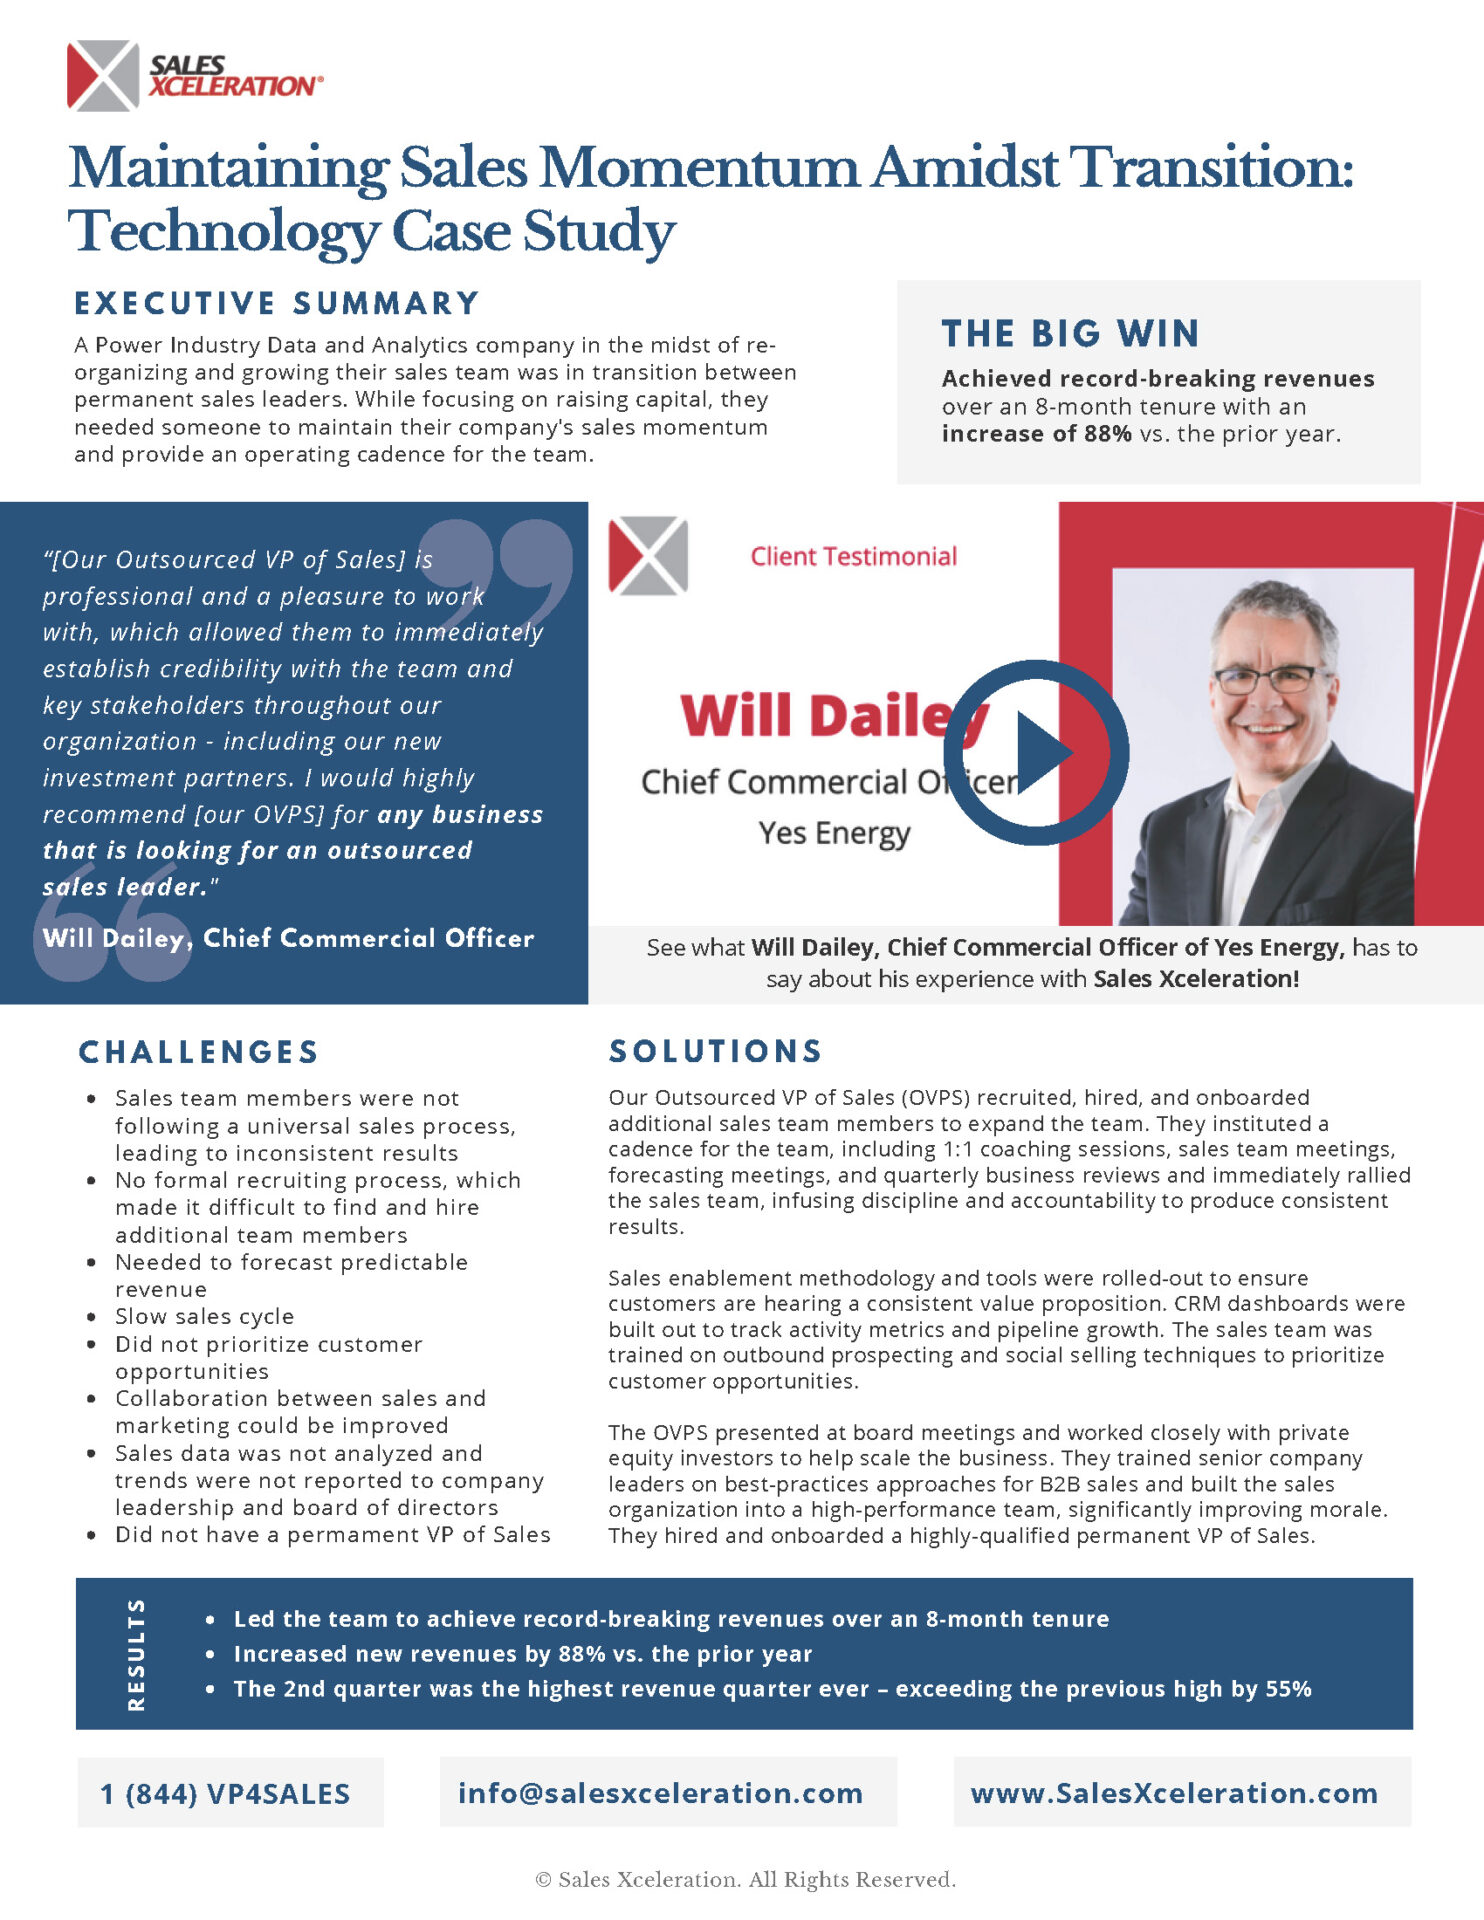 Maintaining Sales Momentum Amidst Transition: Technology Case Study